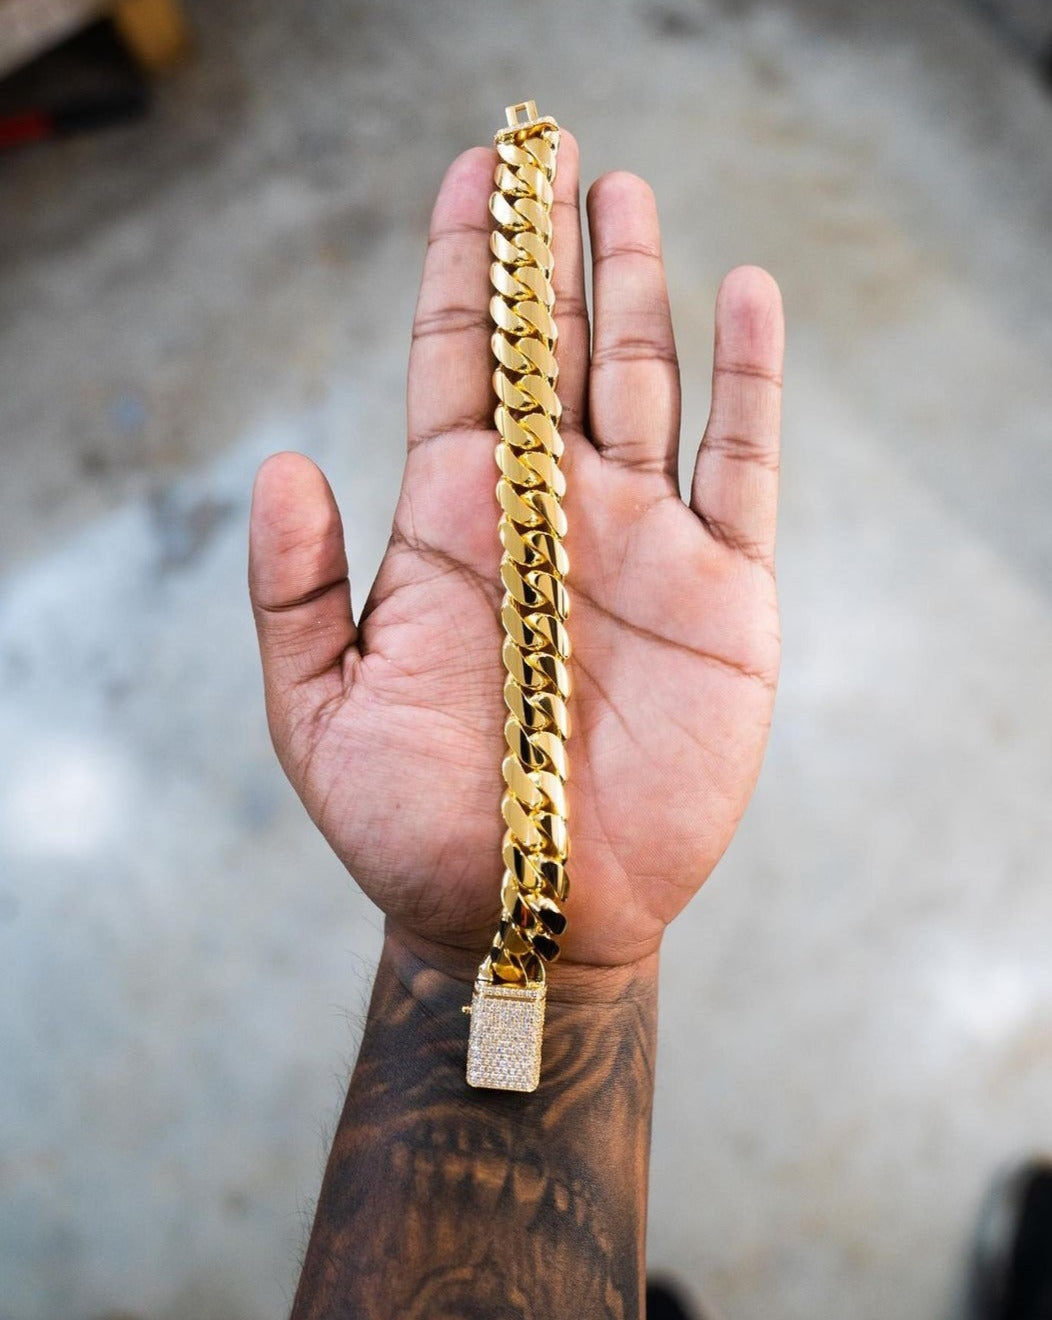 RARE PRINCE by CARAT SUTRA | Solid 10mm Miami Cuban Link Bracelet with Iced Lock | 22kt Gold Micron Plated on 925 Sterling Silver Bracelet with AAA+ Quality Swarovski Diamonds | Men's Jewelry | With Certificate of Authenticity and 925 Hallmark - caratsutra